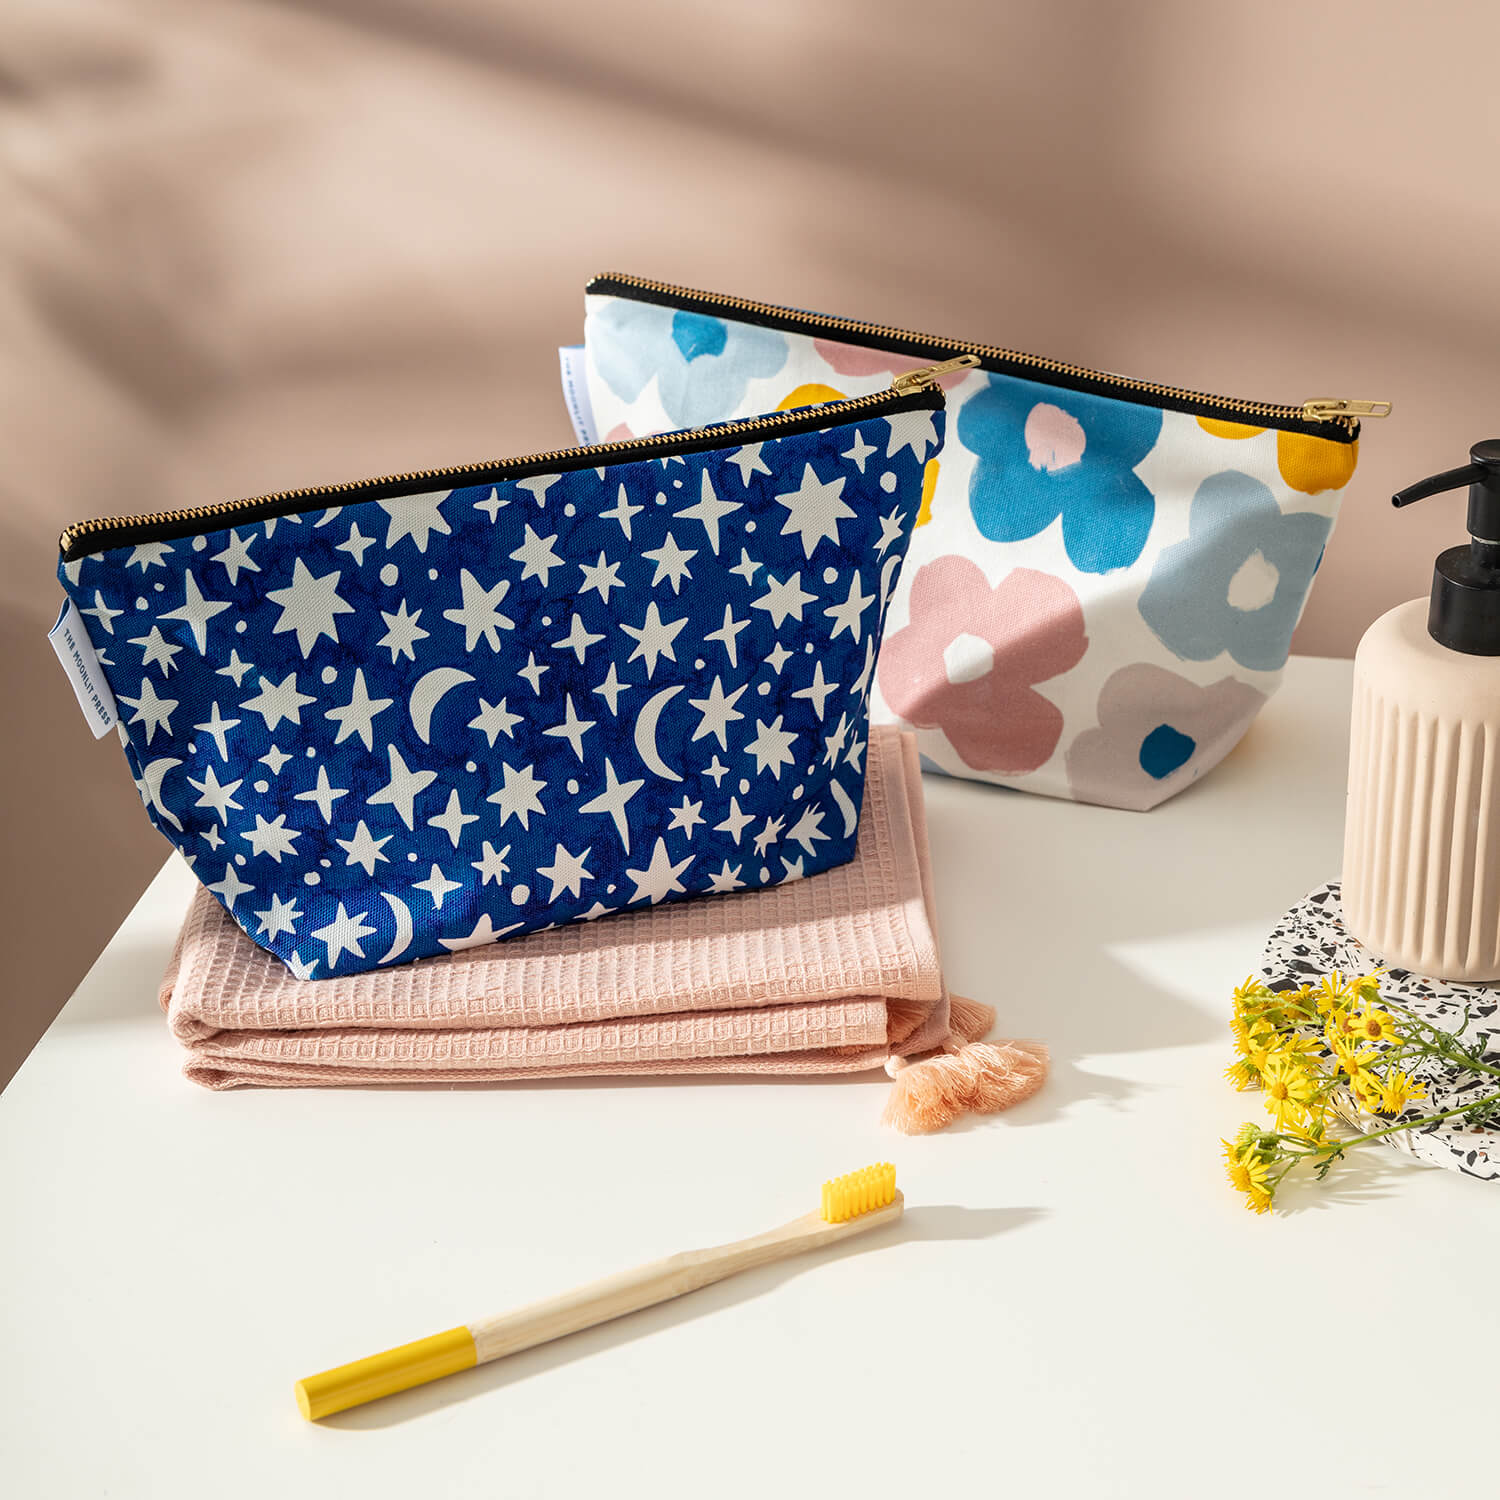 Large Moon and Stars Wash Bag in Pink Bathroom- The Moonlit Press